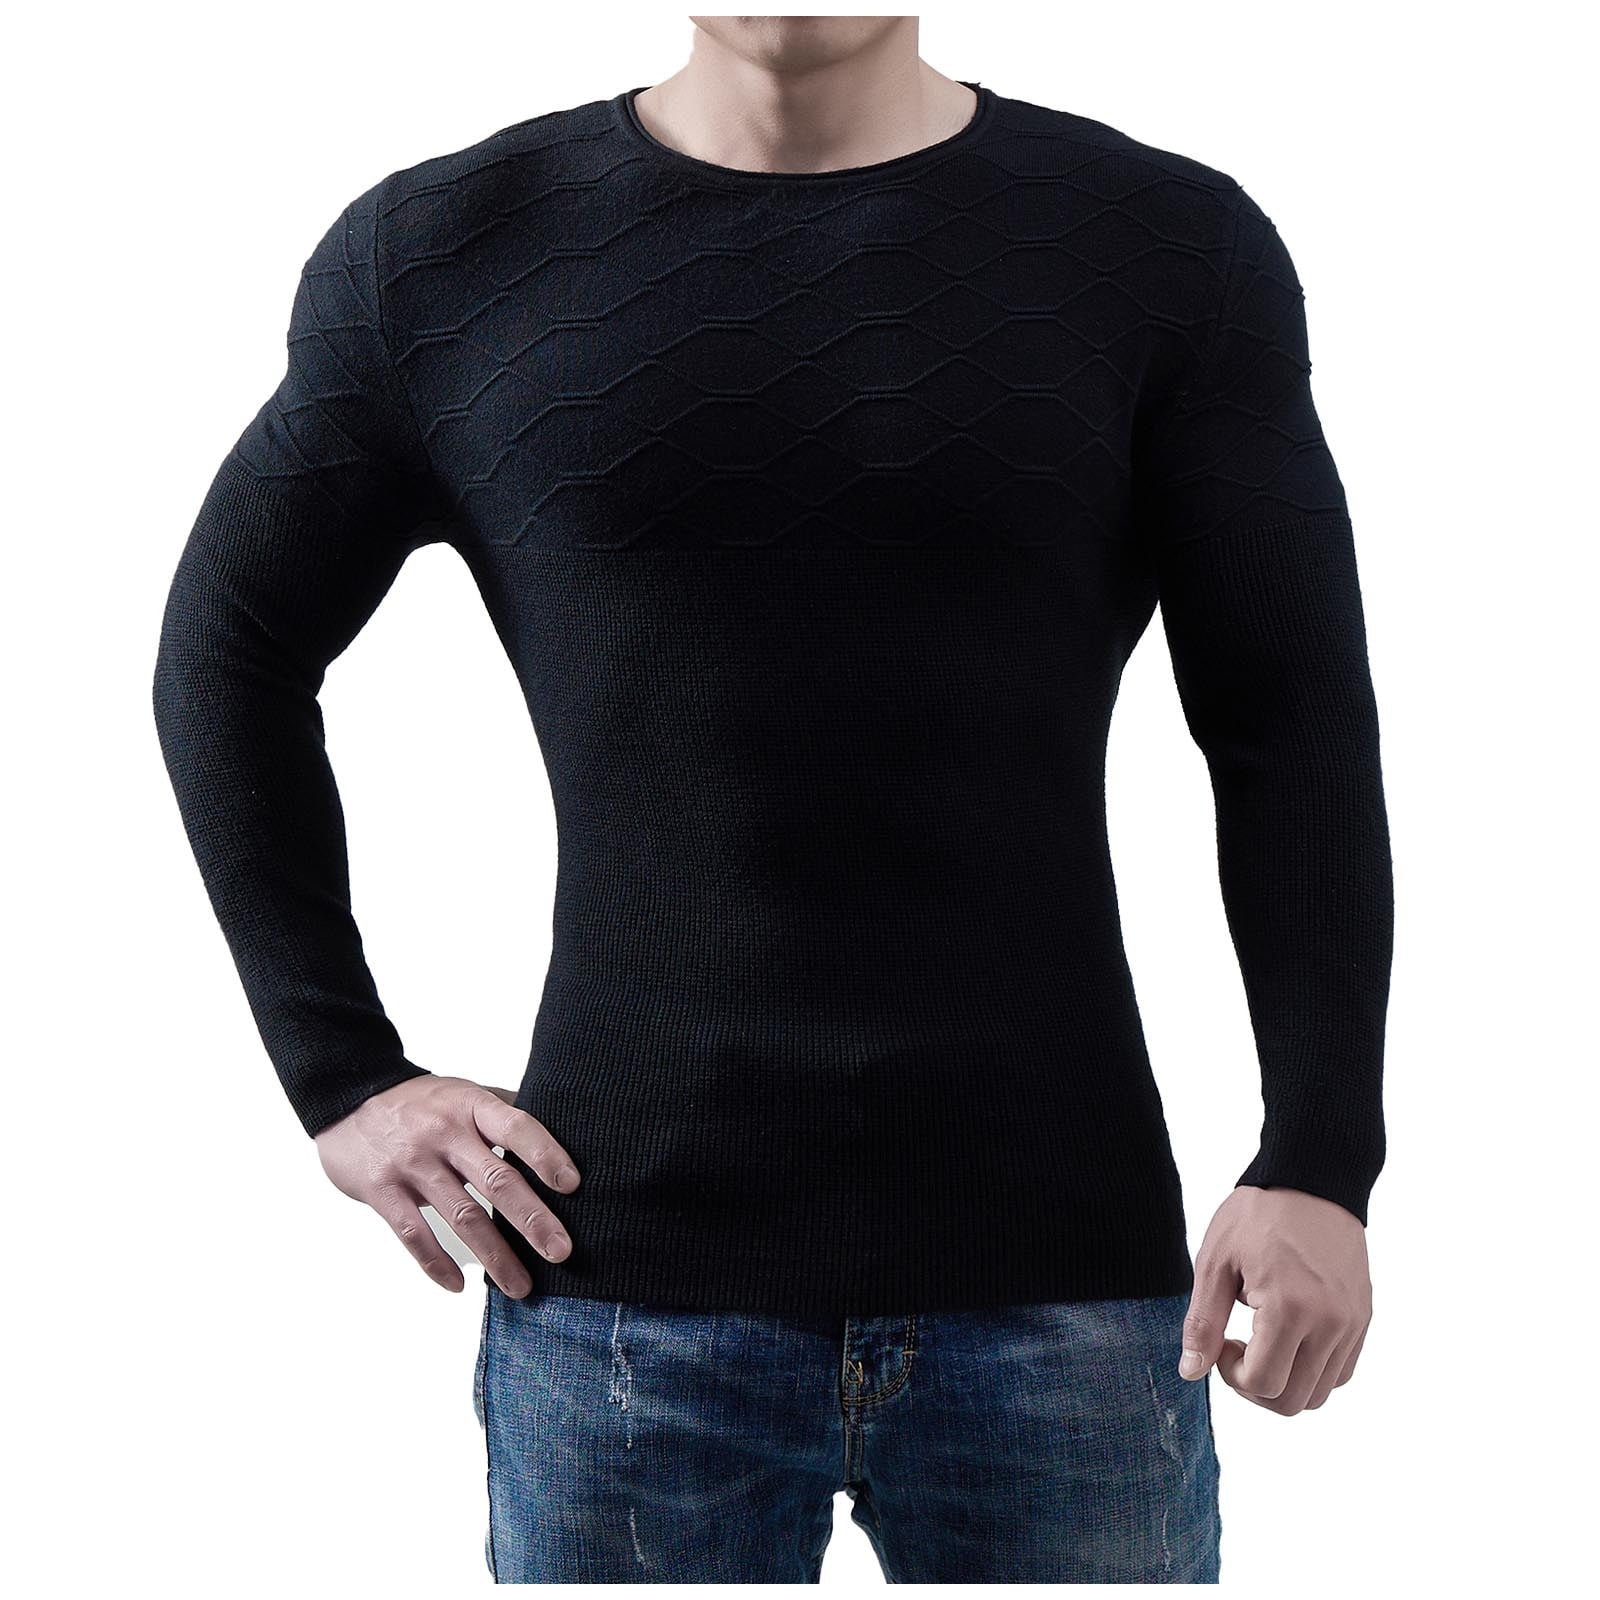 Men's Muscle Fit Compression Shirts Sweater Winter Warm Long Sleeve  Base-Layer Workout T Shirts Sports Running Tops